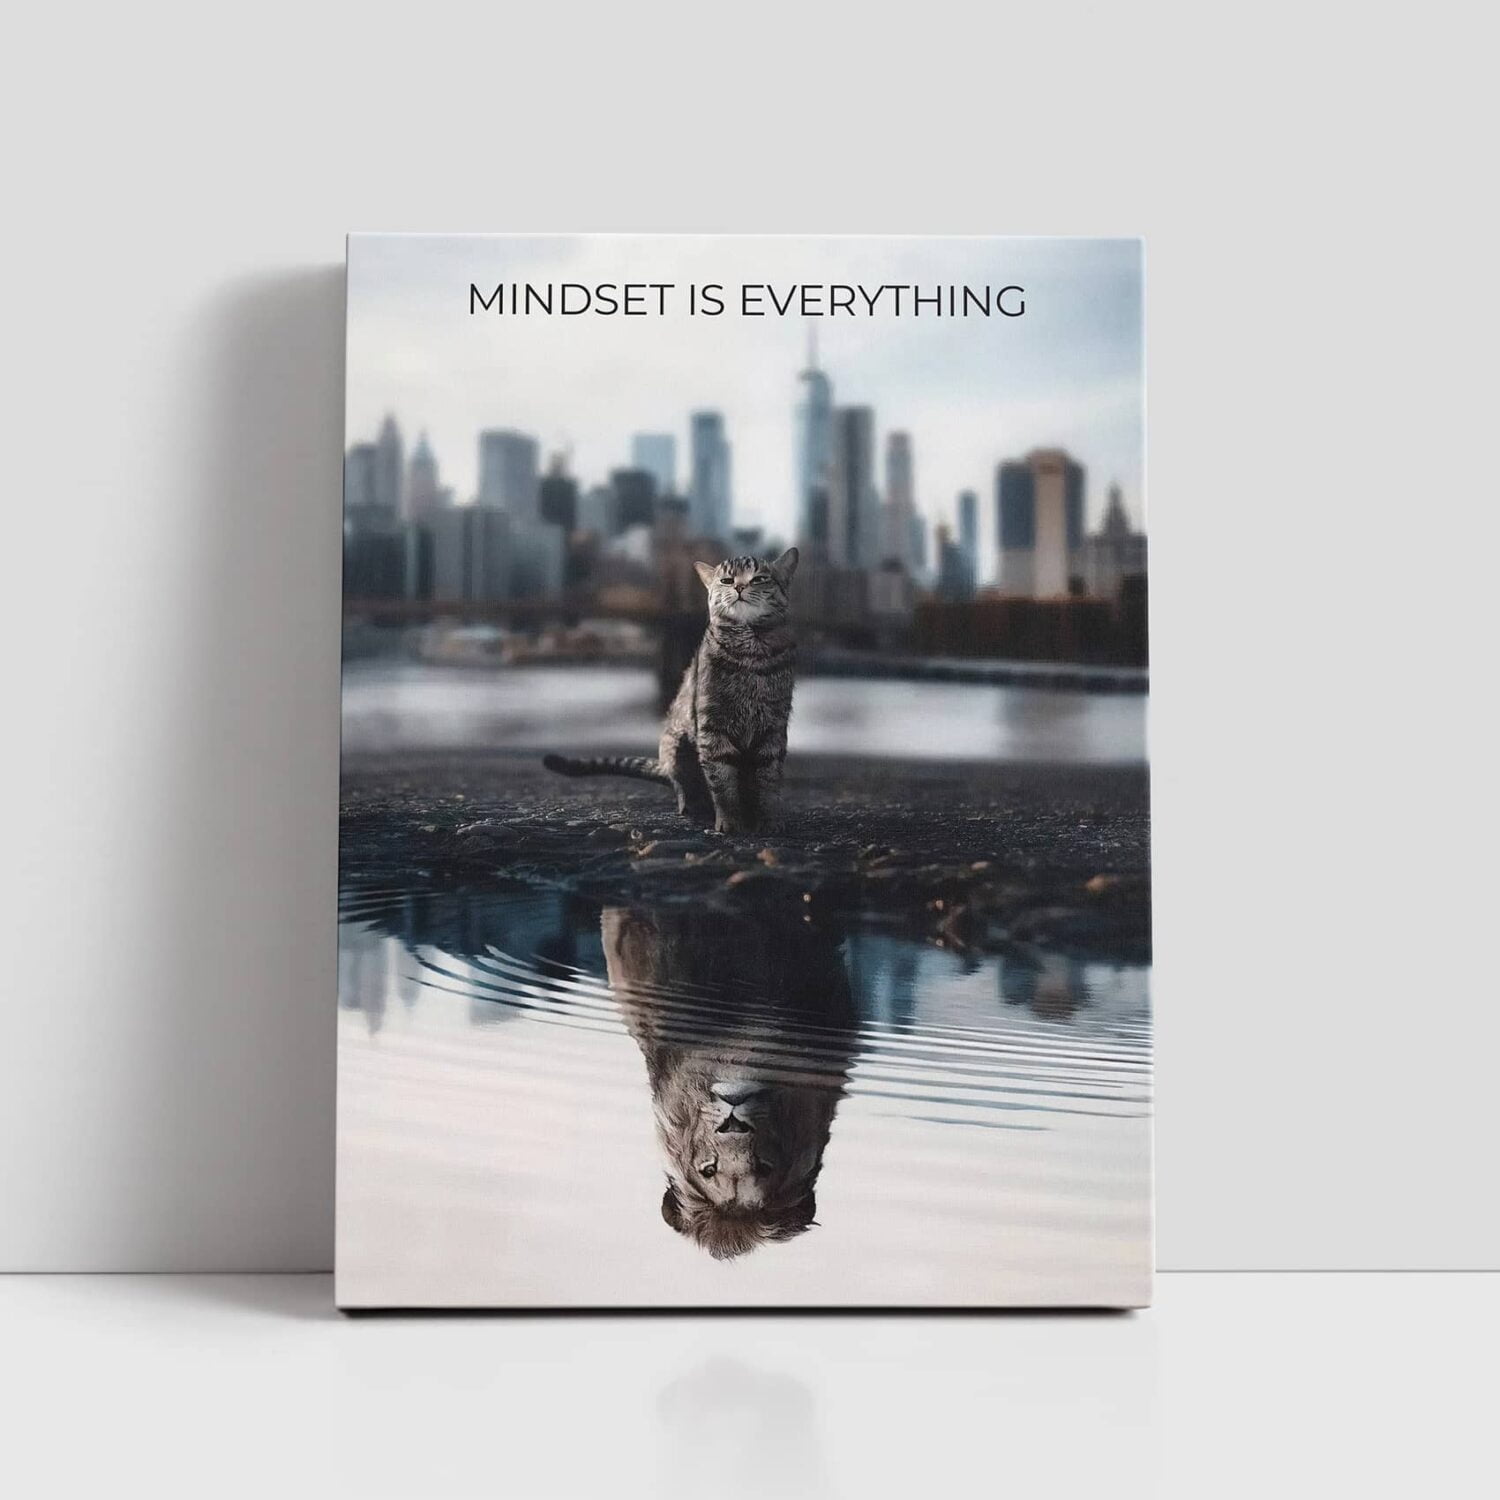 Mindset is Everything Canvas featuring a cat looking into a puddle and seeing a lion in as the reflection. Printing in County Monaghan, Ireland